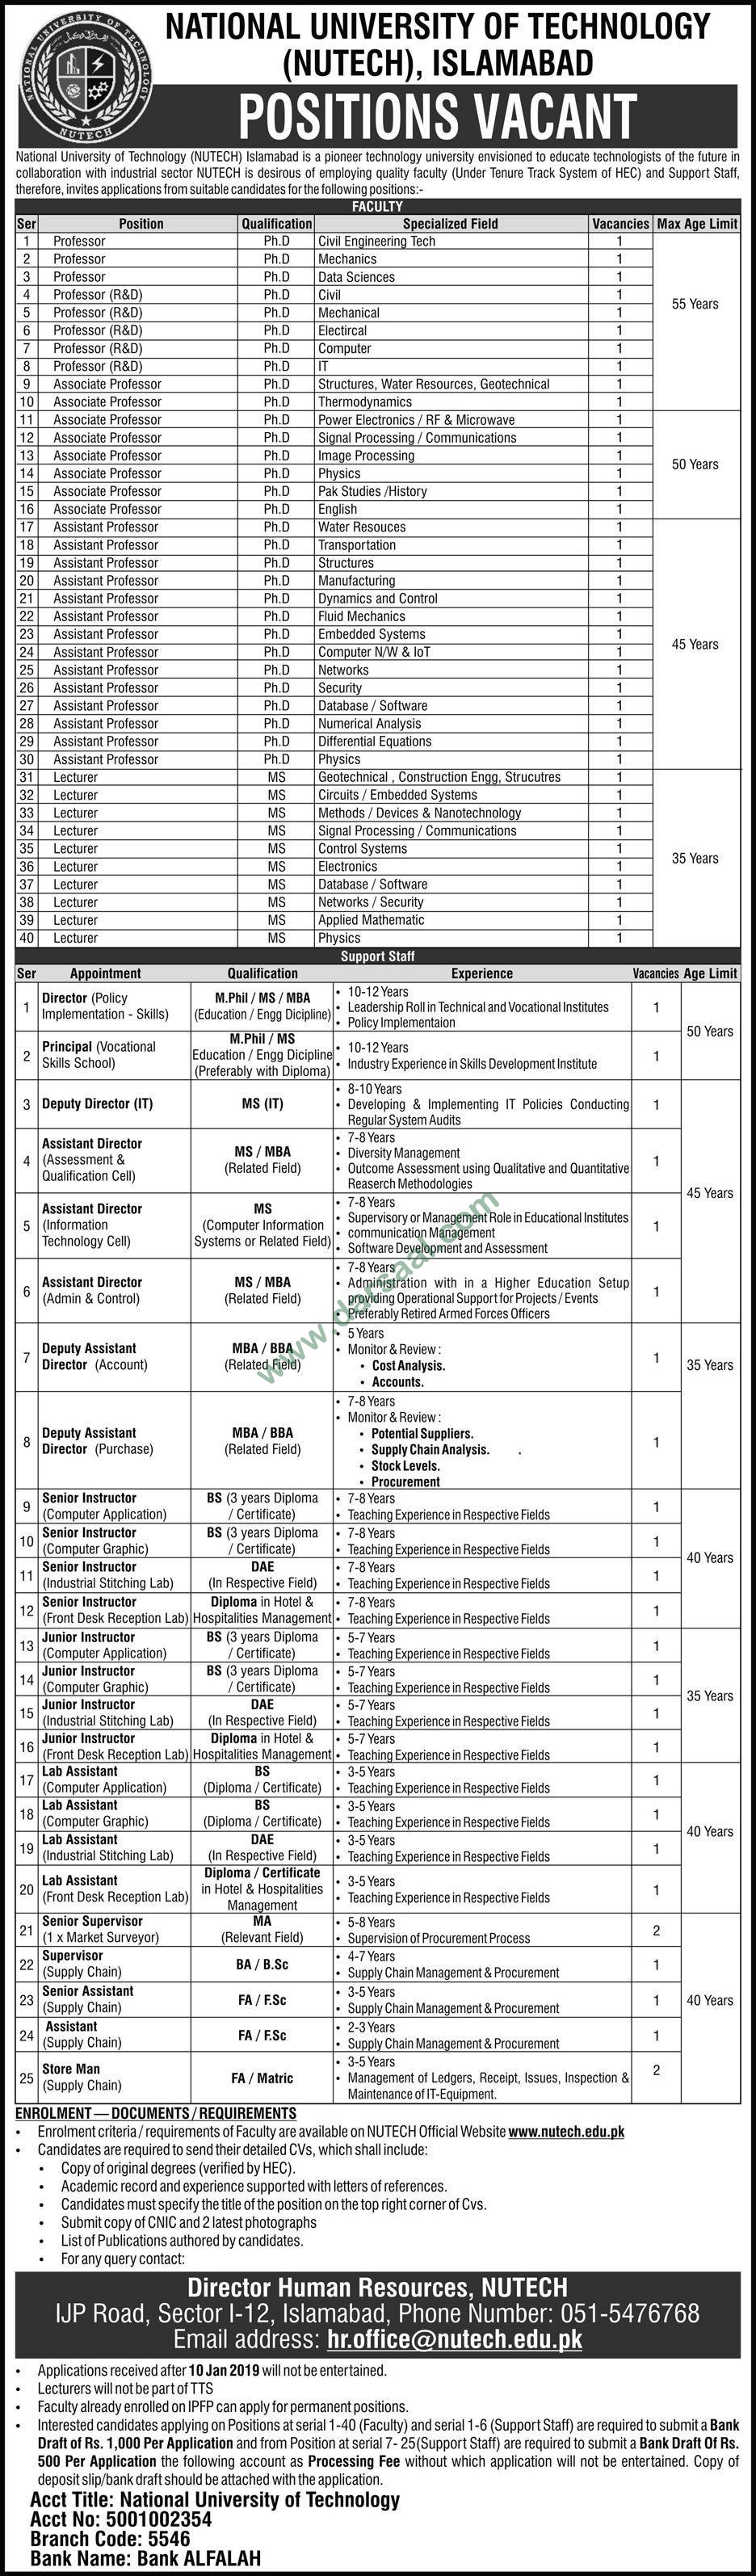 Senior Instructor Jobs in National University of Technology in Islamabad - Dec 24, 2018